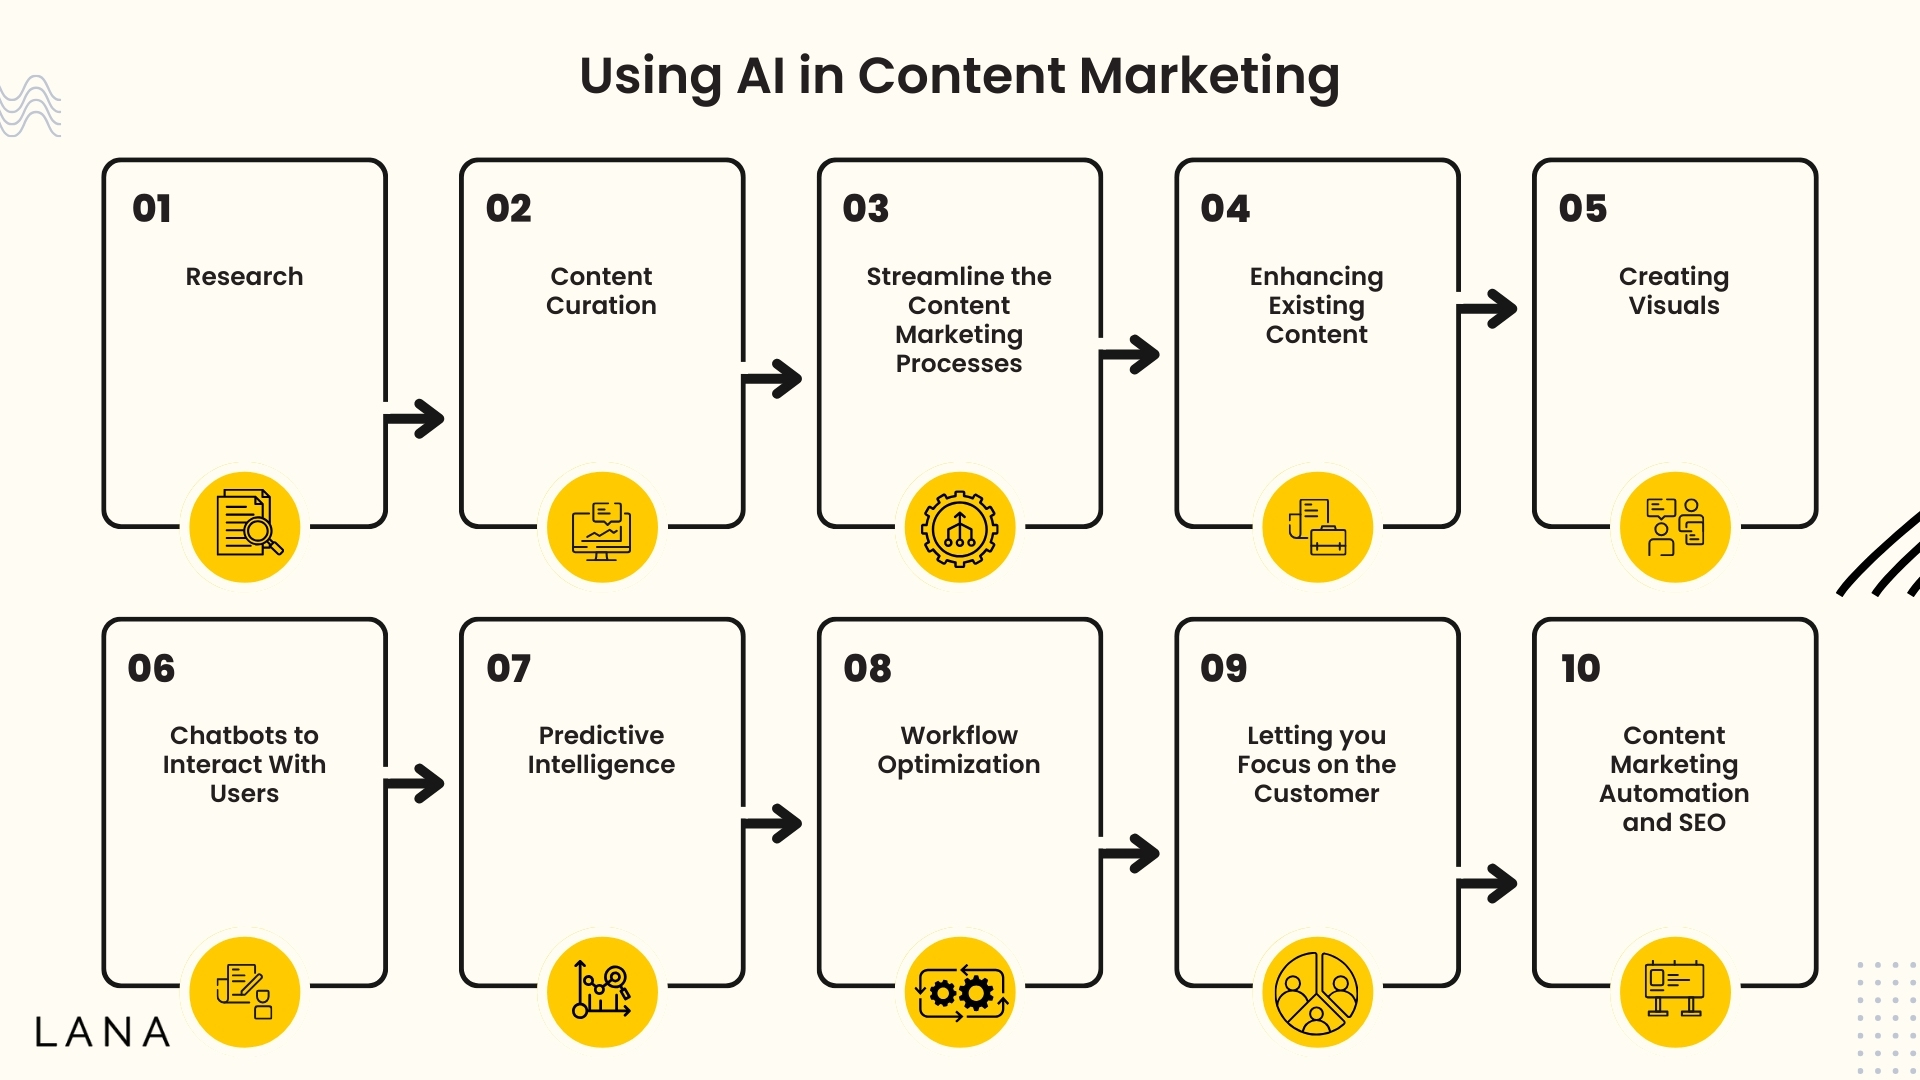 Ways to Implement AI Into Content Marketing